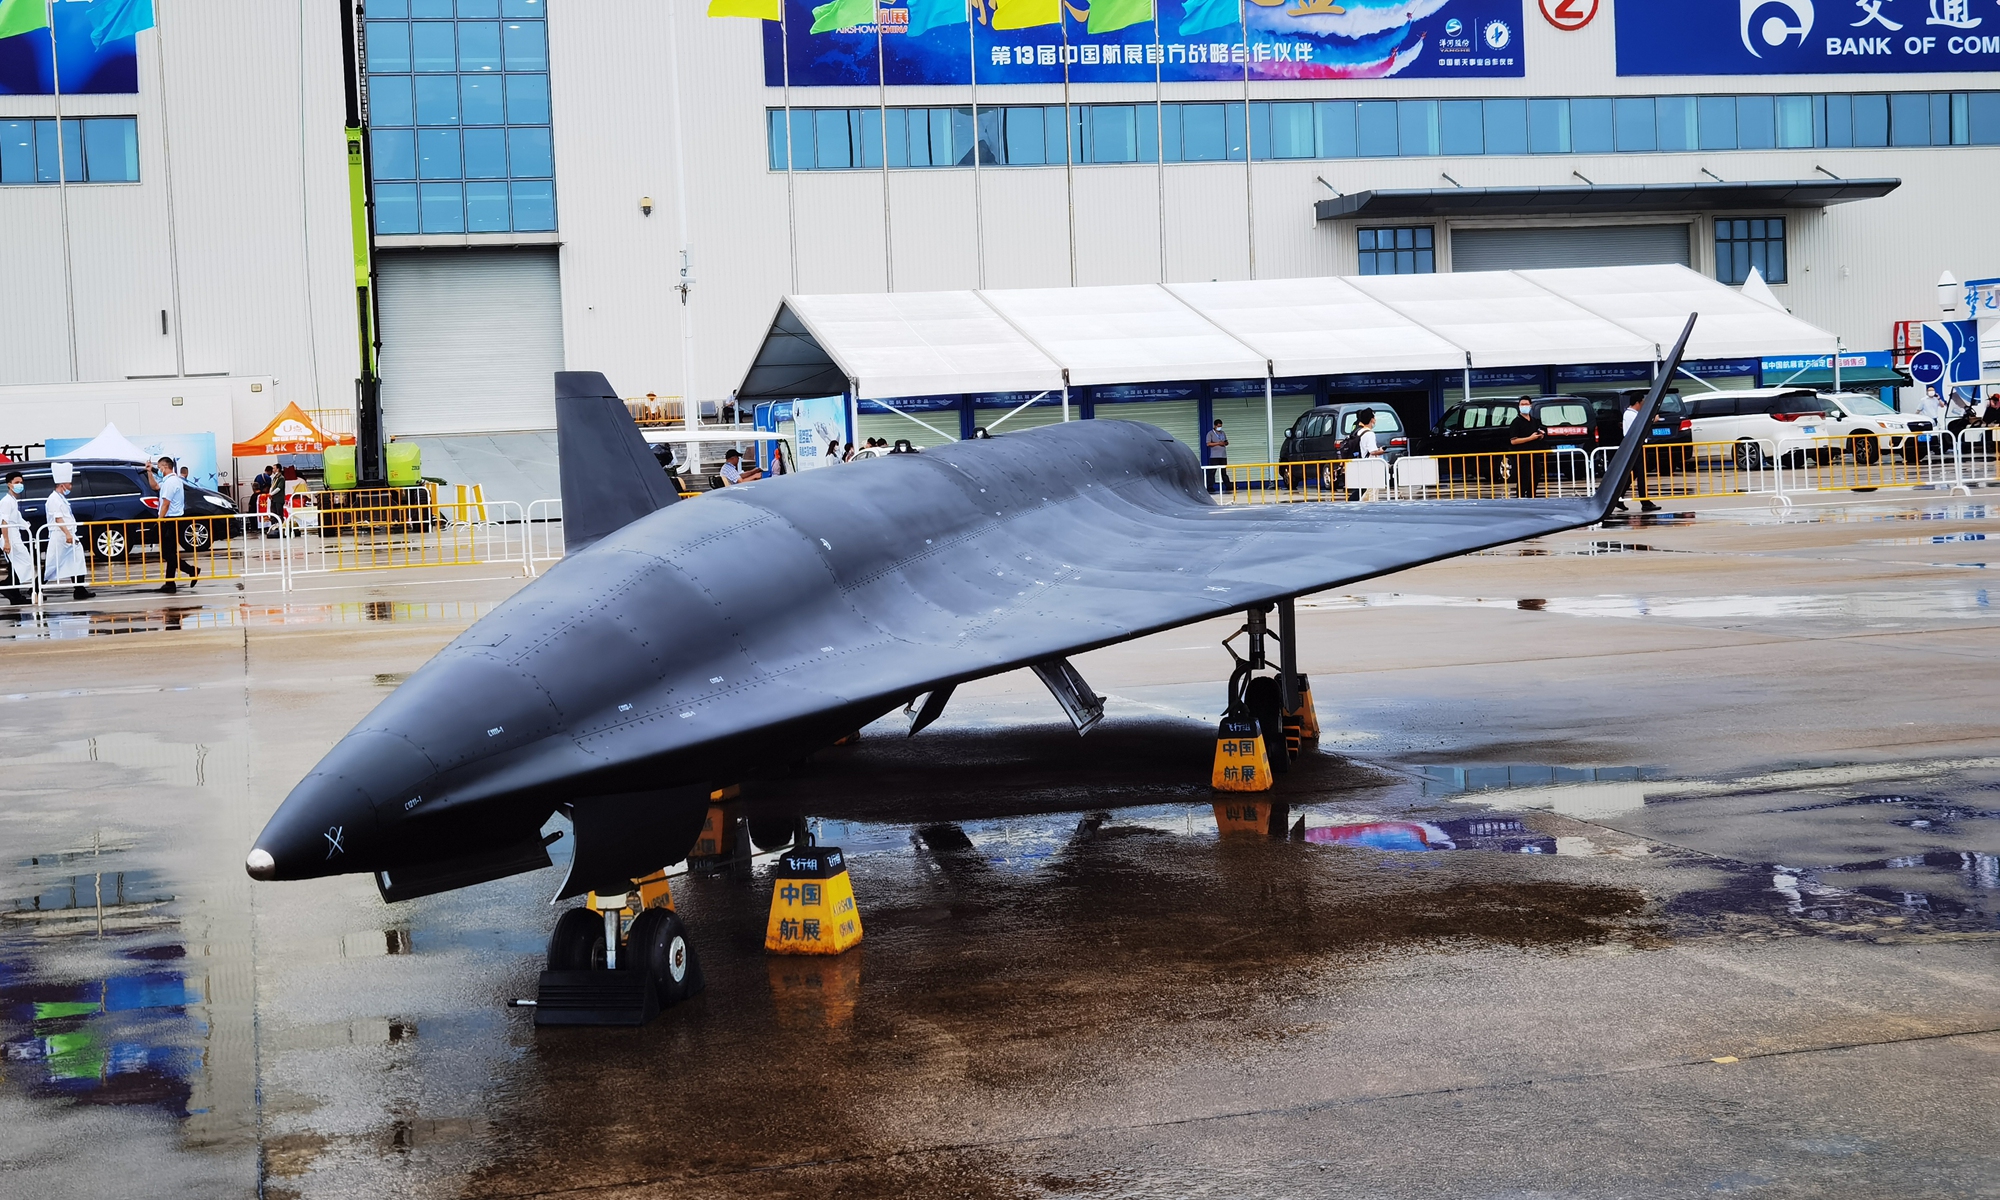 The WZ-8 reconnaissance drone is seen at Airshow China 2021 in Zhuhai, South China's Guangdong Province on Tuesday.
Photo: Yang Sheng/Global Times